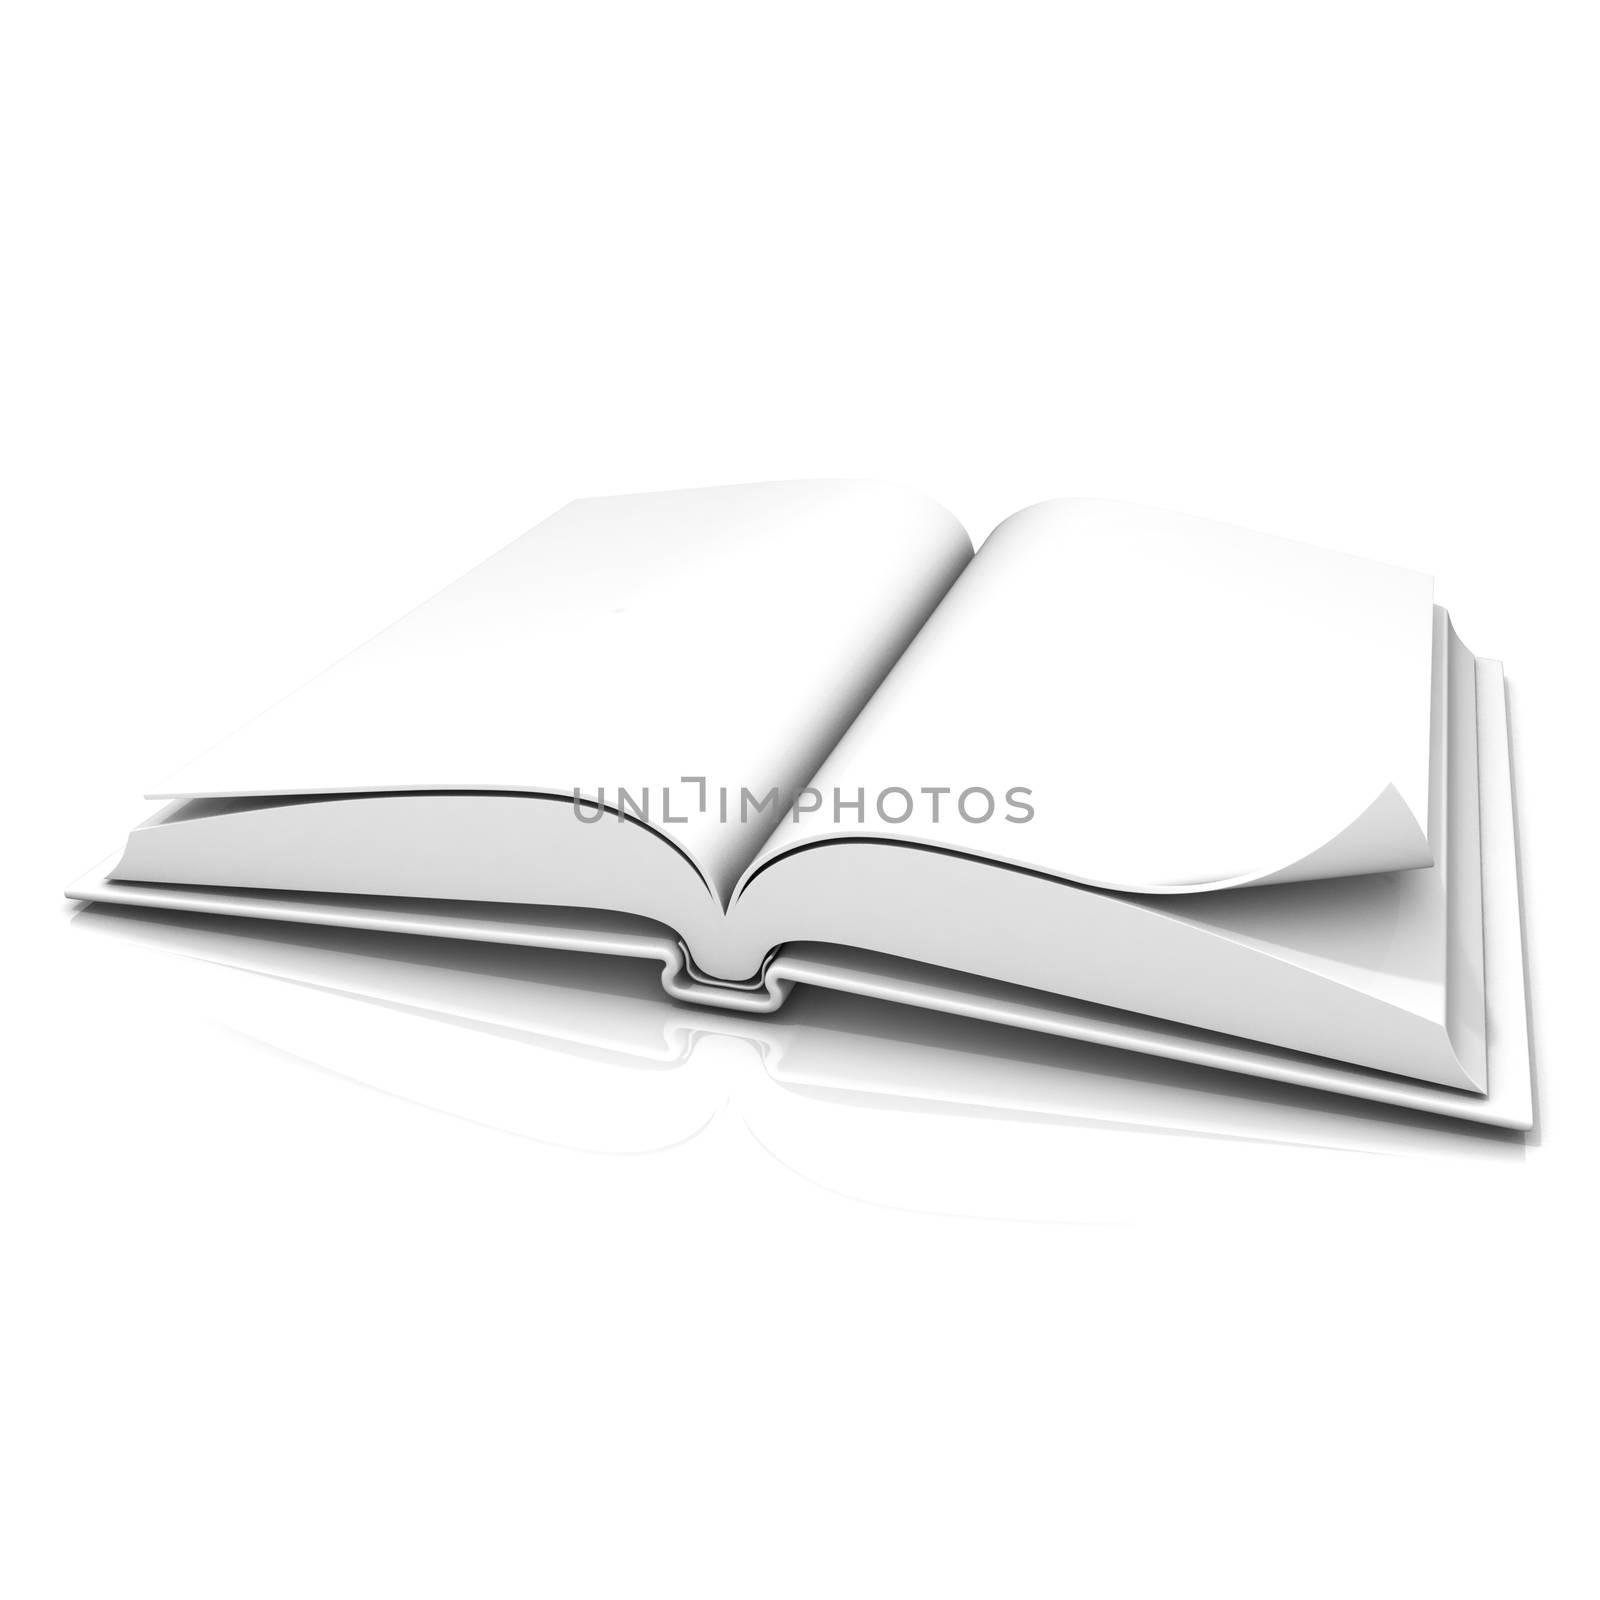 Blank open white book, isolated on white